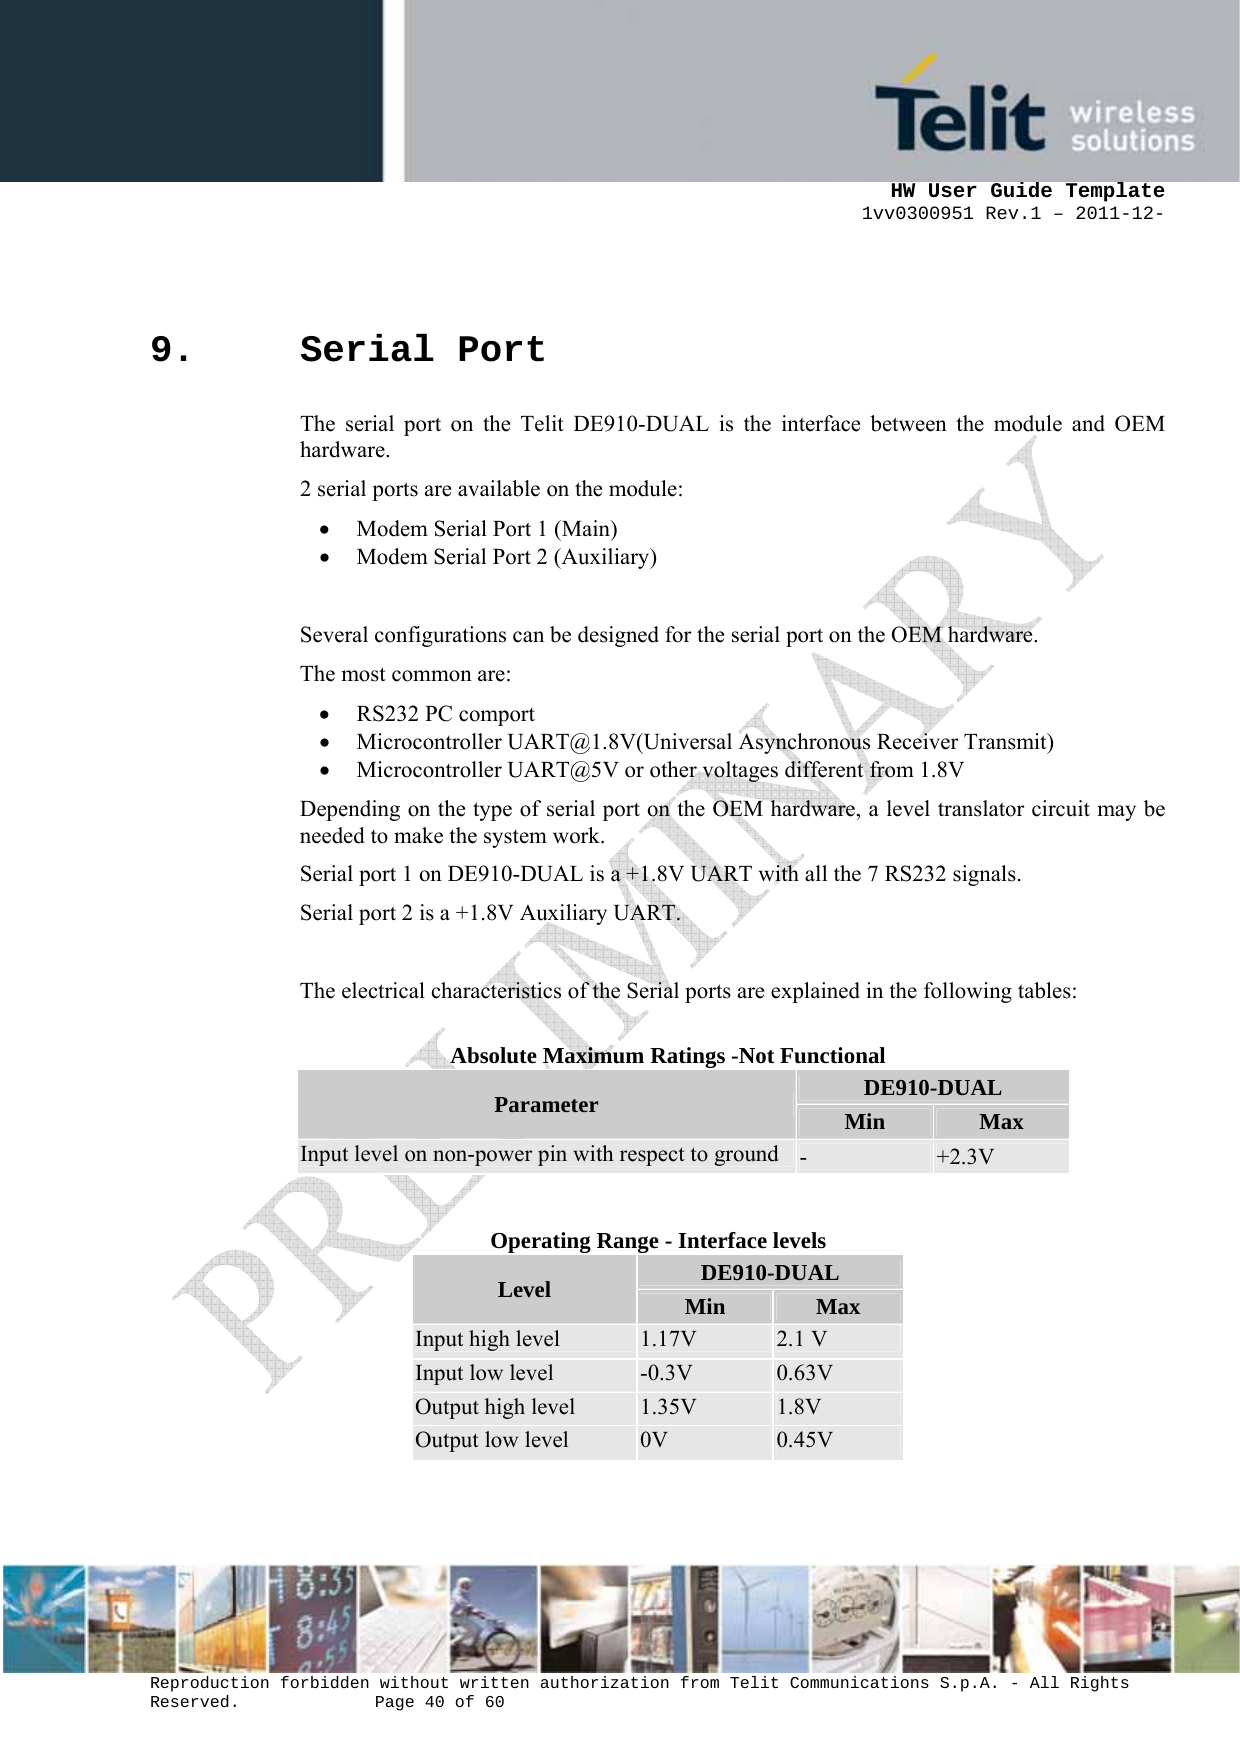      HW User Guide Template 1vv0300951 Rev.1 – 2011-12-  Reproduction forbidden without written authorization from Telit Communications S.p.A. - All Rights Reserved.    Page 40 of 60                                                     9. Serial Port The serial port on the Telit DE910-DUAL is the interface between the module and OEM hardware.  2 serial ports are available on the module: • Modem Serial Port 1 (Main) • Modem Serial Port 2 (Auxiliary)  Several configurations can be designed for the serial port on the OEM hardware.  The most common are: • RS232 PC comport • Microcontroller UART@1.8V(Universal Asynchronous Receiver Transmit) • Microcontroller UART@5V or other voltages different from 1.8V Depending on the type of serial port on the OEM hardware, a level translator circuit may be needed to make the system work.  Serial port 1 on DE910-DUAL is a +1.8V UART with all the 7 RS232 signals.  Serial port 2 is a +1.8V Auxiliary UART.  The electrical characteristics of the Serial ports are explained in the following tables:  Absolute Maximum Ratings -Not Functional Parameter  DE910-DUAL Min  Max Input level on non-power pin with respect to ground -  +2.3V   Operating Range - Interface levels Level  DE910-DUAL Min  Max Input high level  1.17V  2.1 V Input low level  -0.3V  0.63V Output high level  1.35V  1.8V Output low level  0V  0.45V  